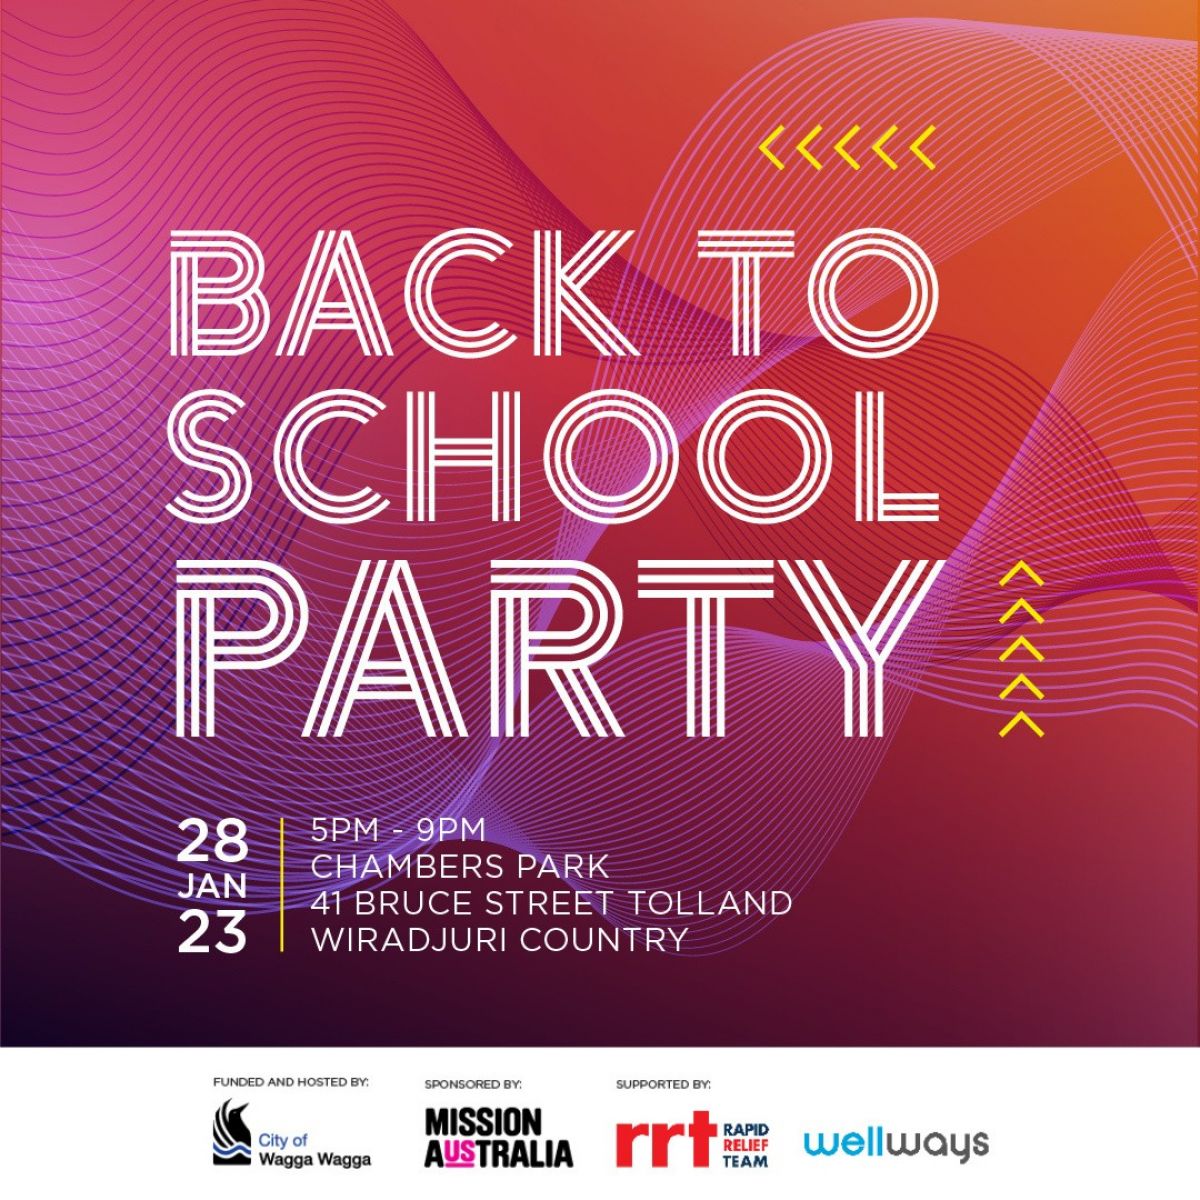 Back to School Party 28 Jan 2023, 5-9pm, Chambers Park, 41 Bruce Street, Tolland, Wiradjuri Country